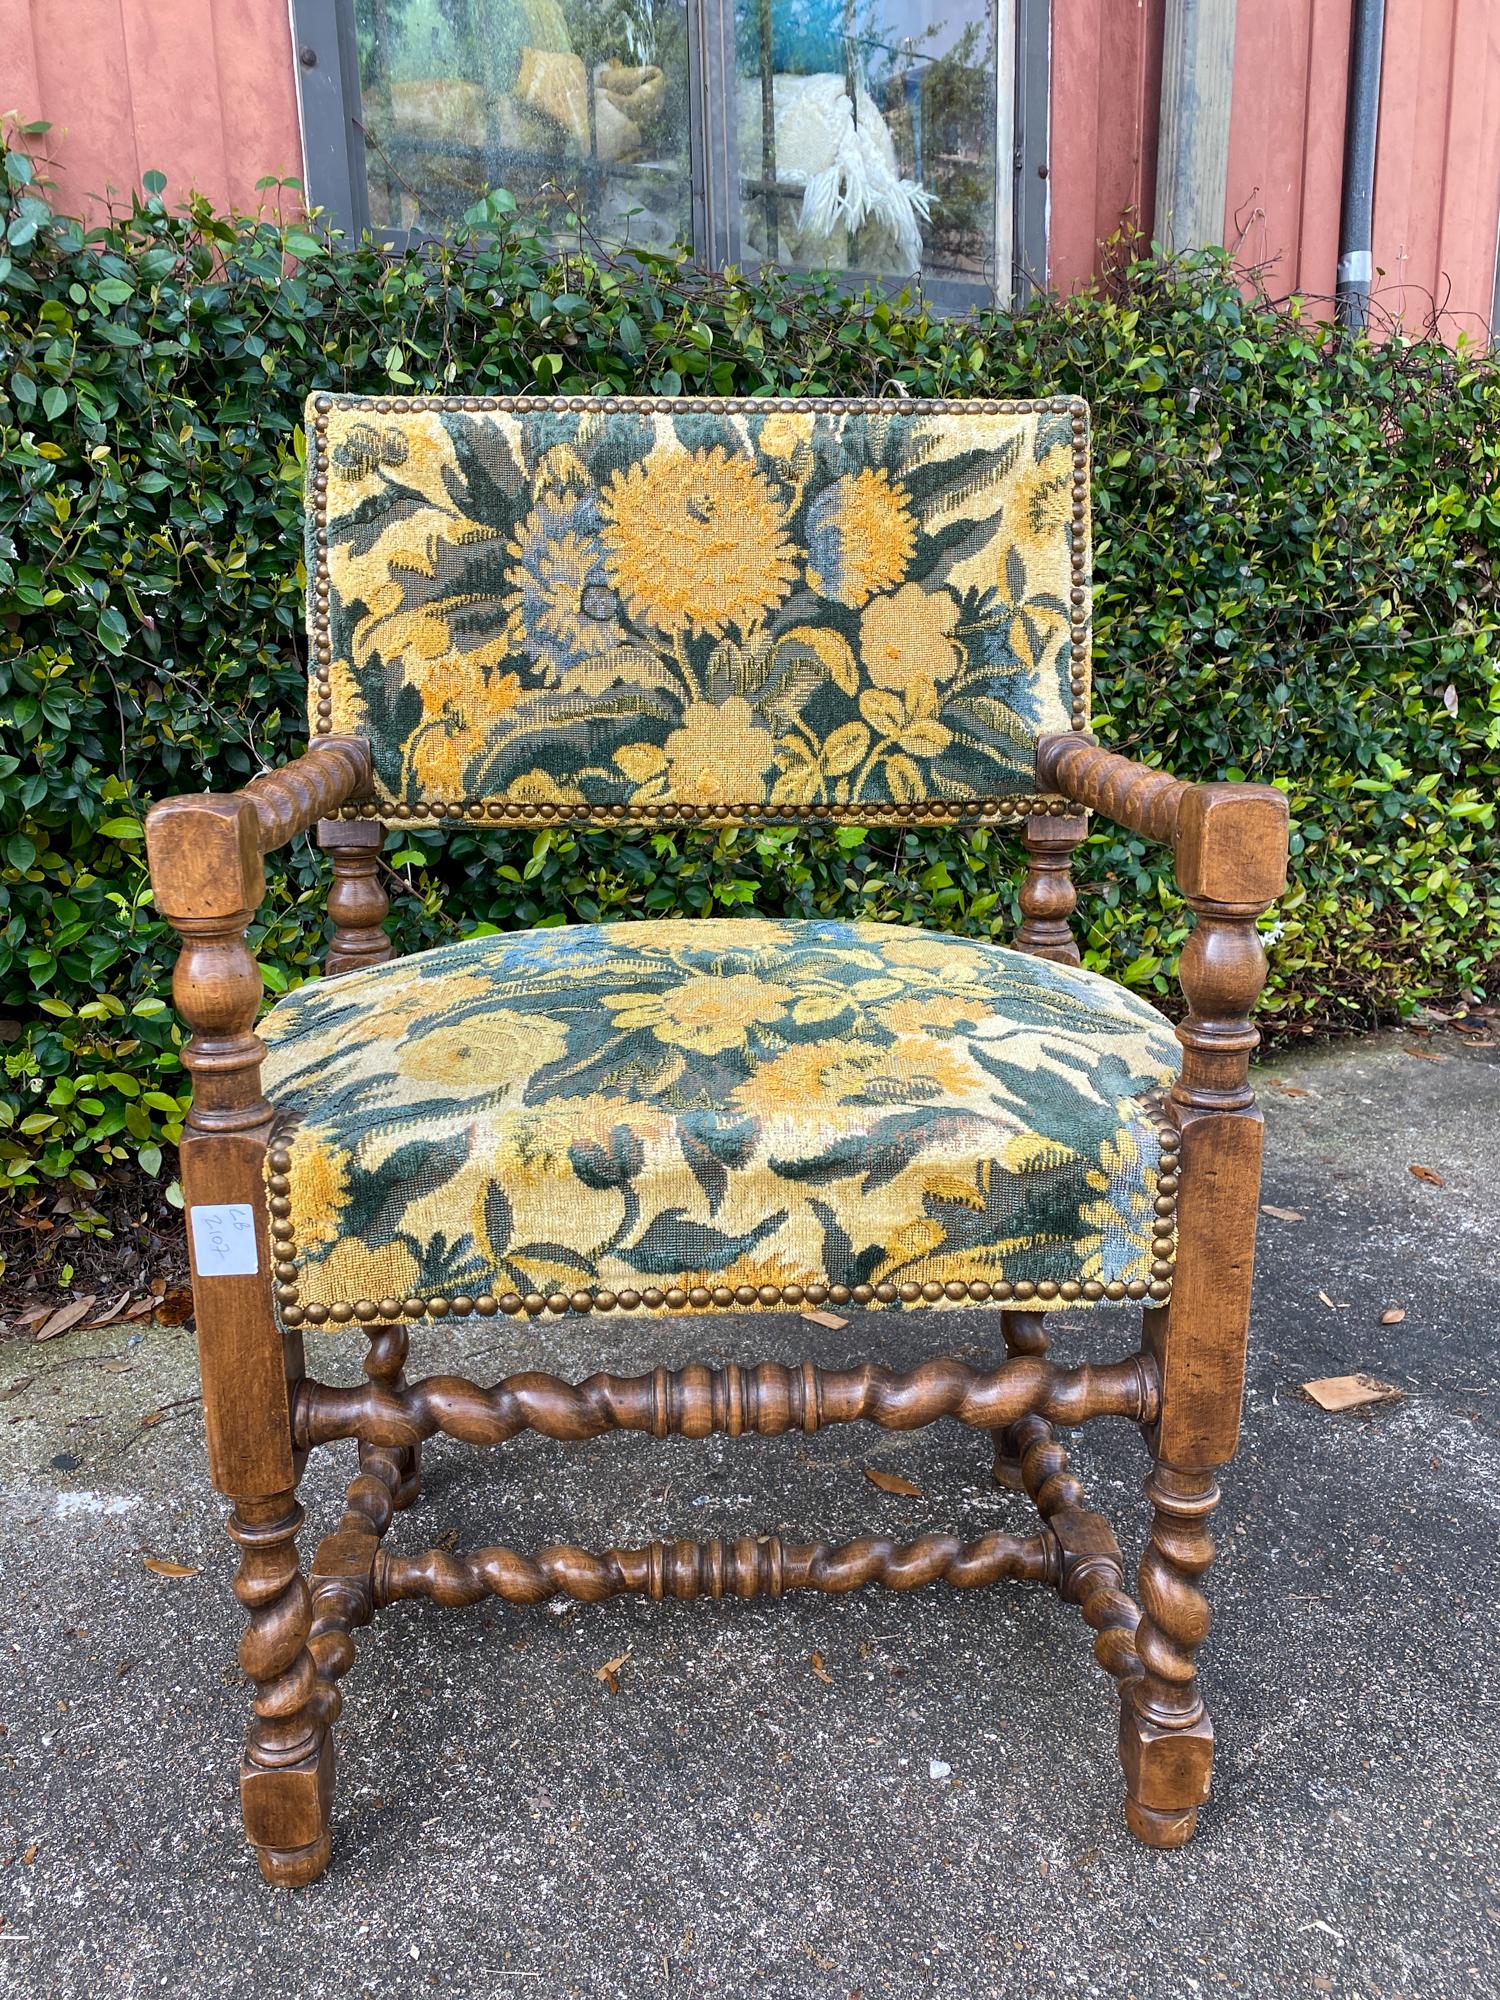 Hand-Carved Antique French Barley Twist Armchair with Floral Upholstery, circa 1900